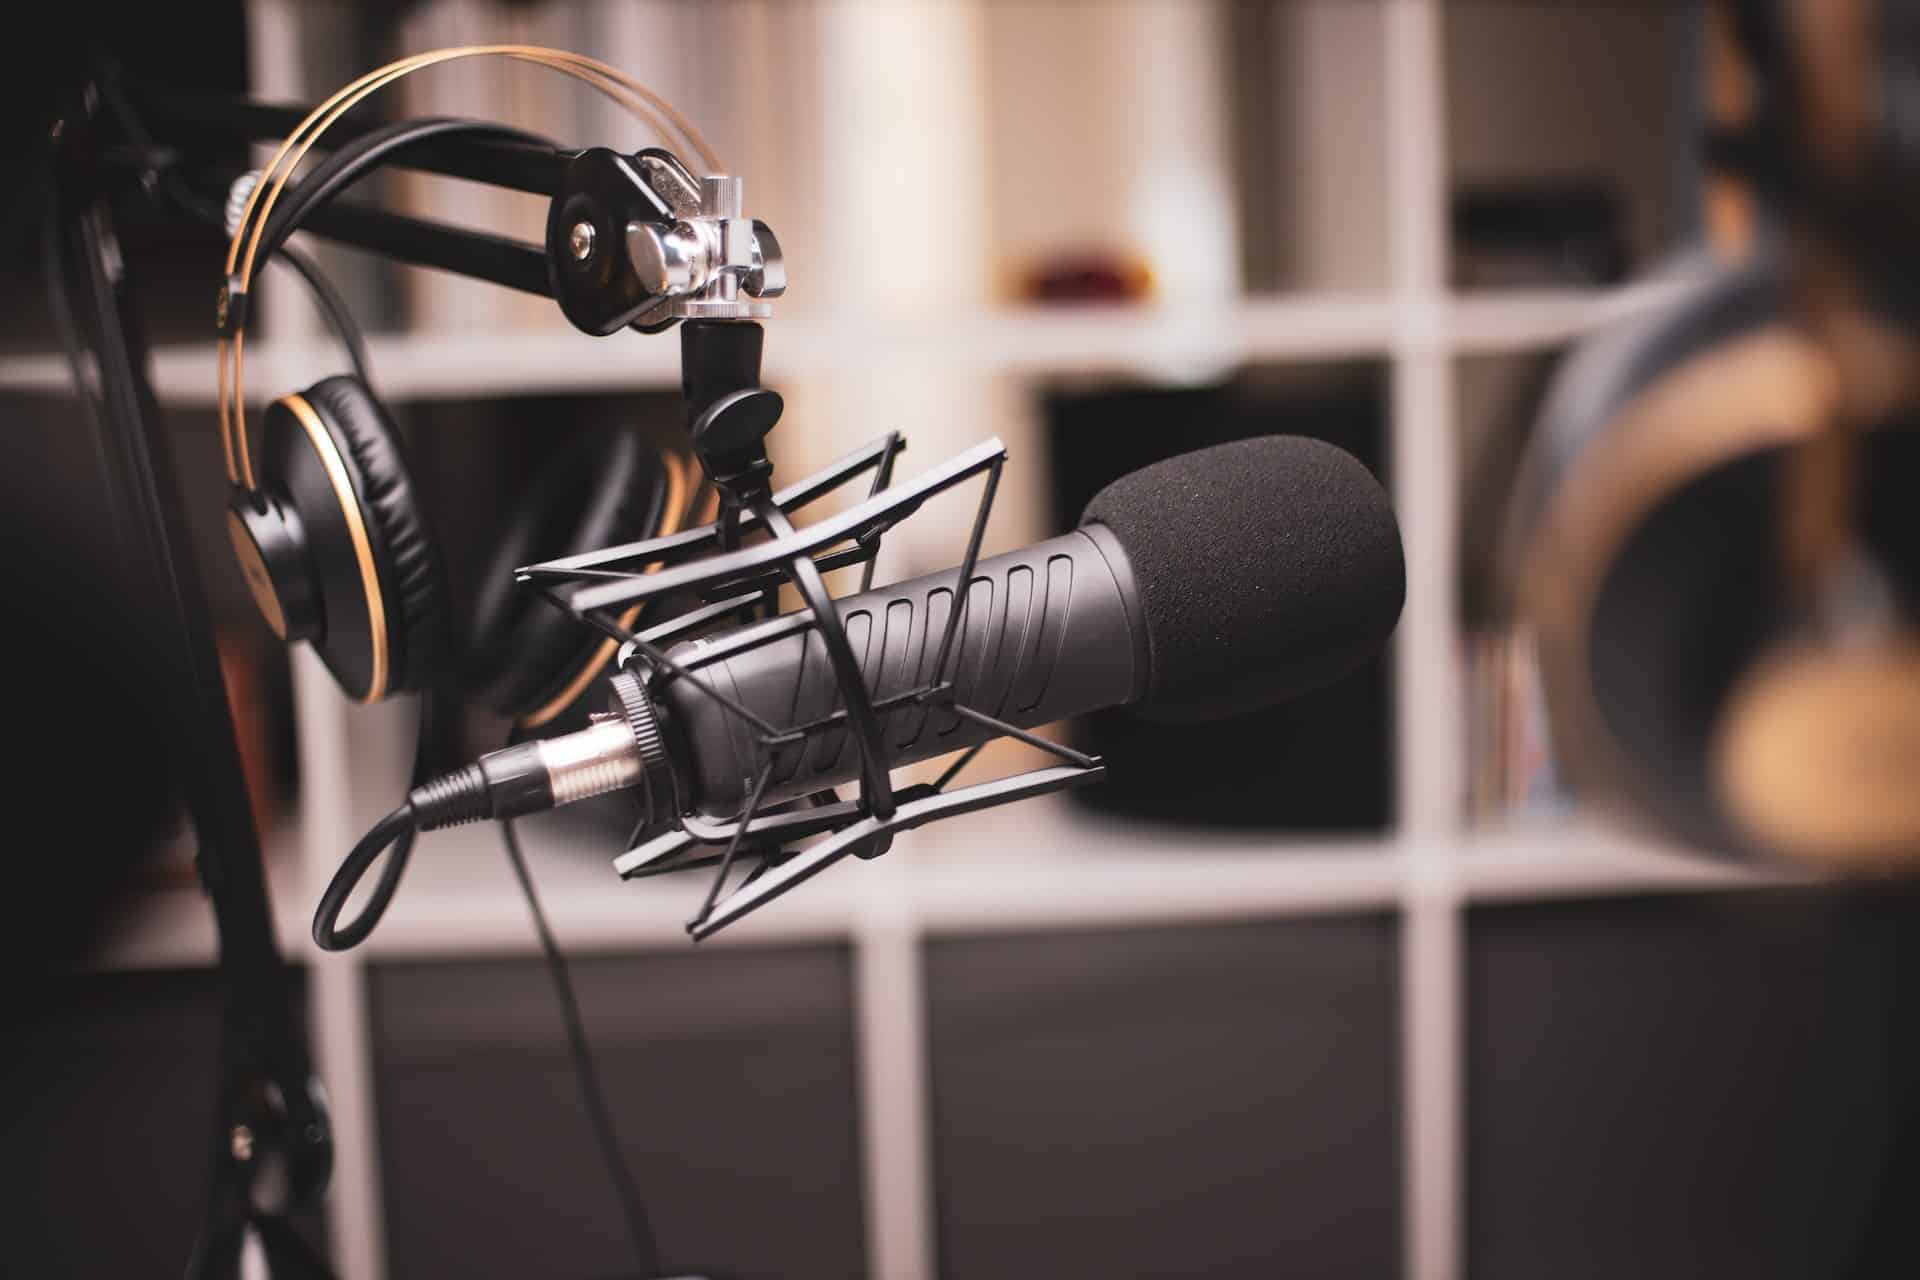 Podcast Microphone Setup: How to Set Up Your Mic and Recording Space